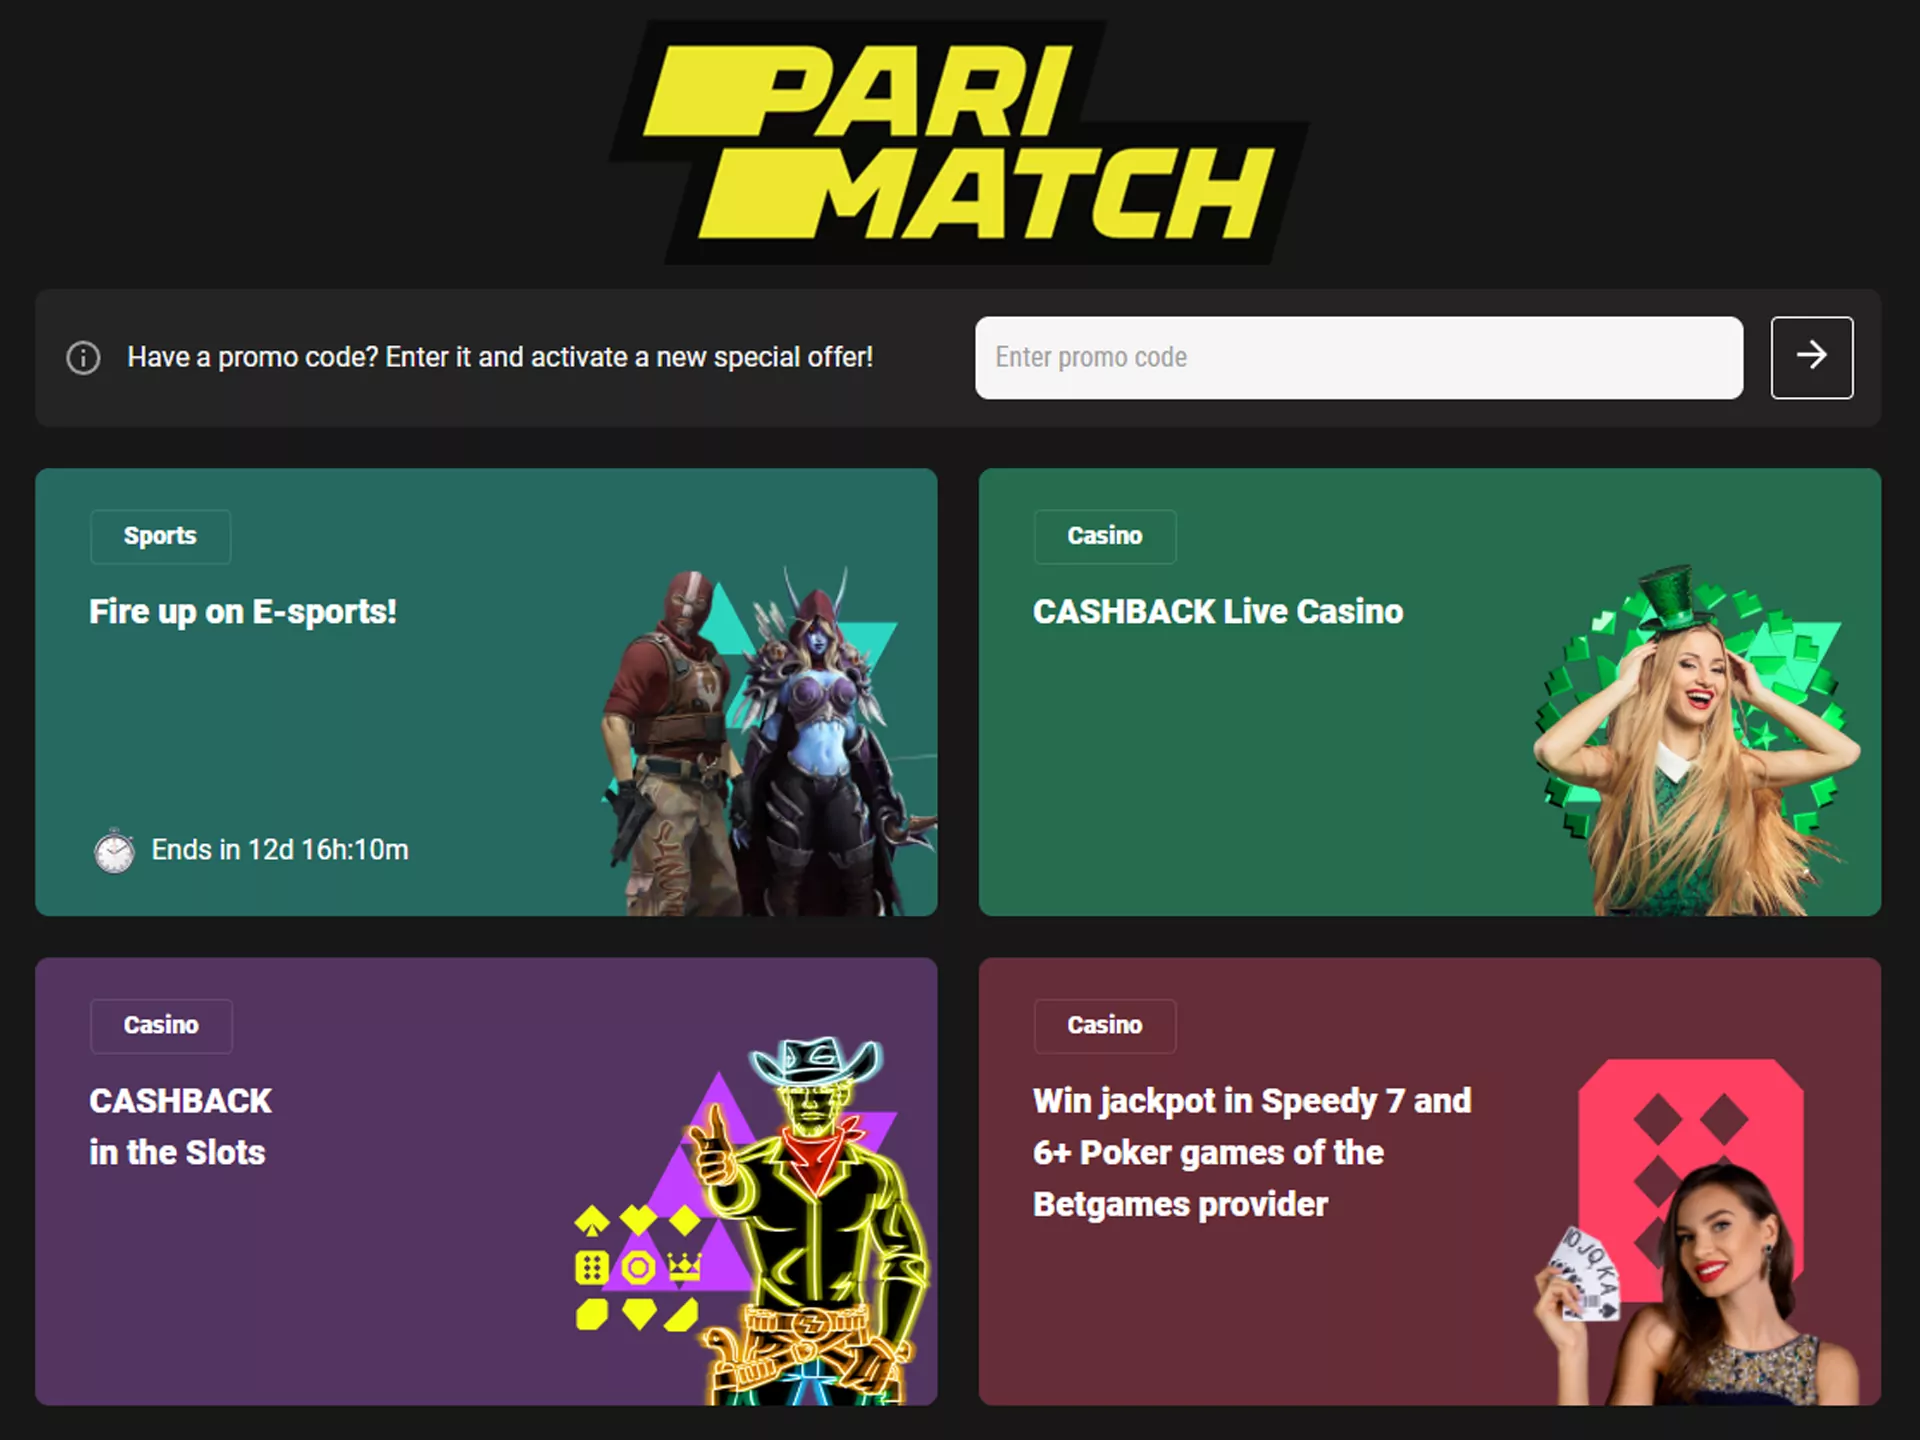 Parimatch has different bonuses for new and regular customers.